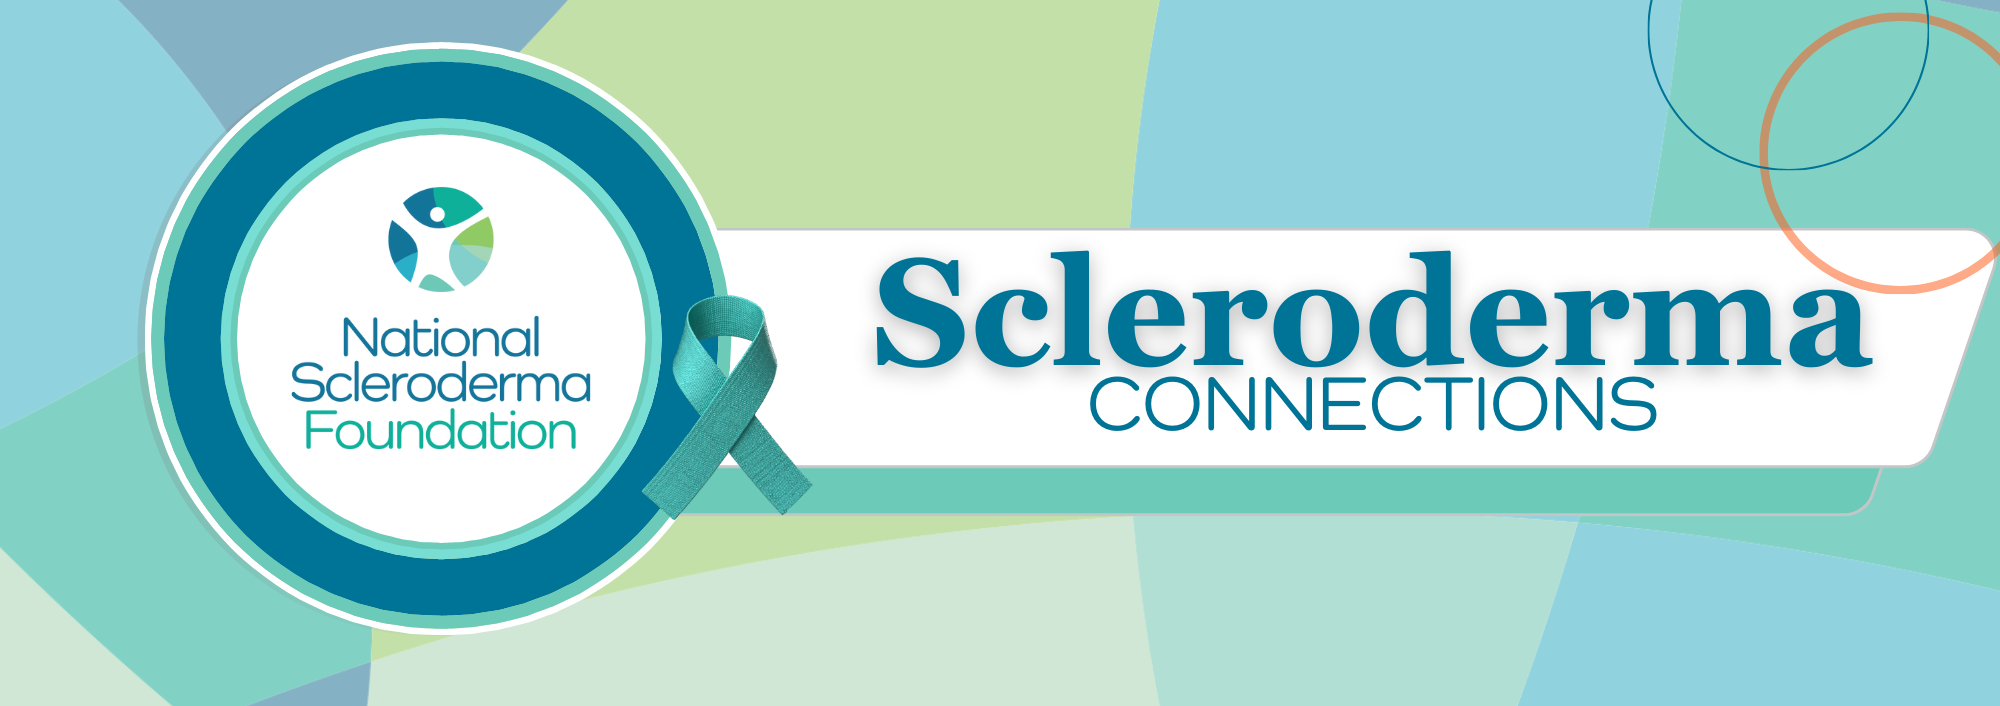 Scleroderma Connections 